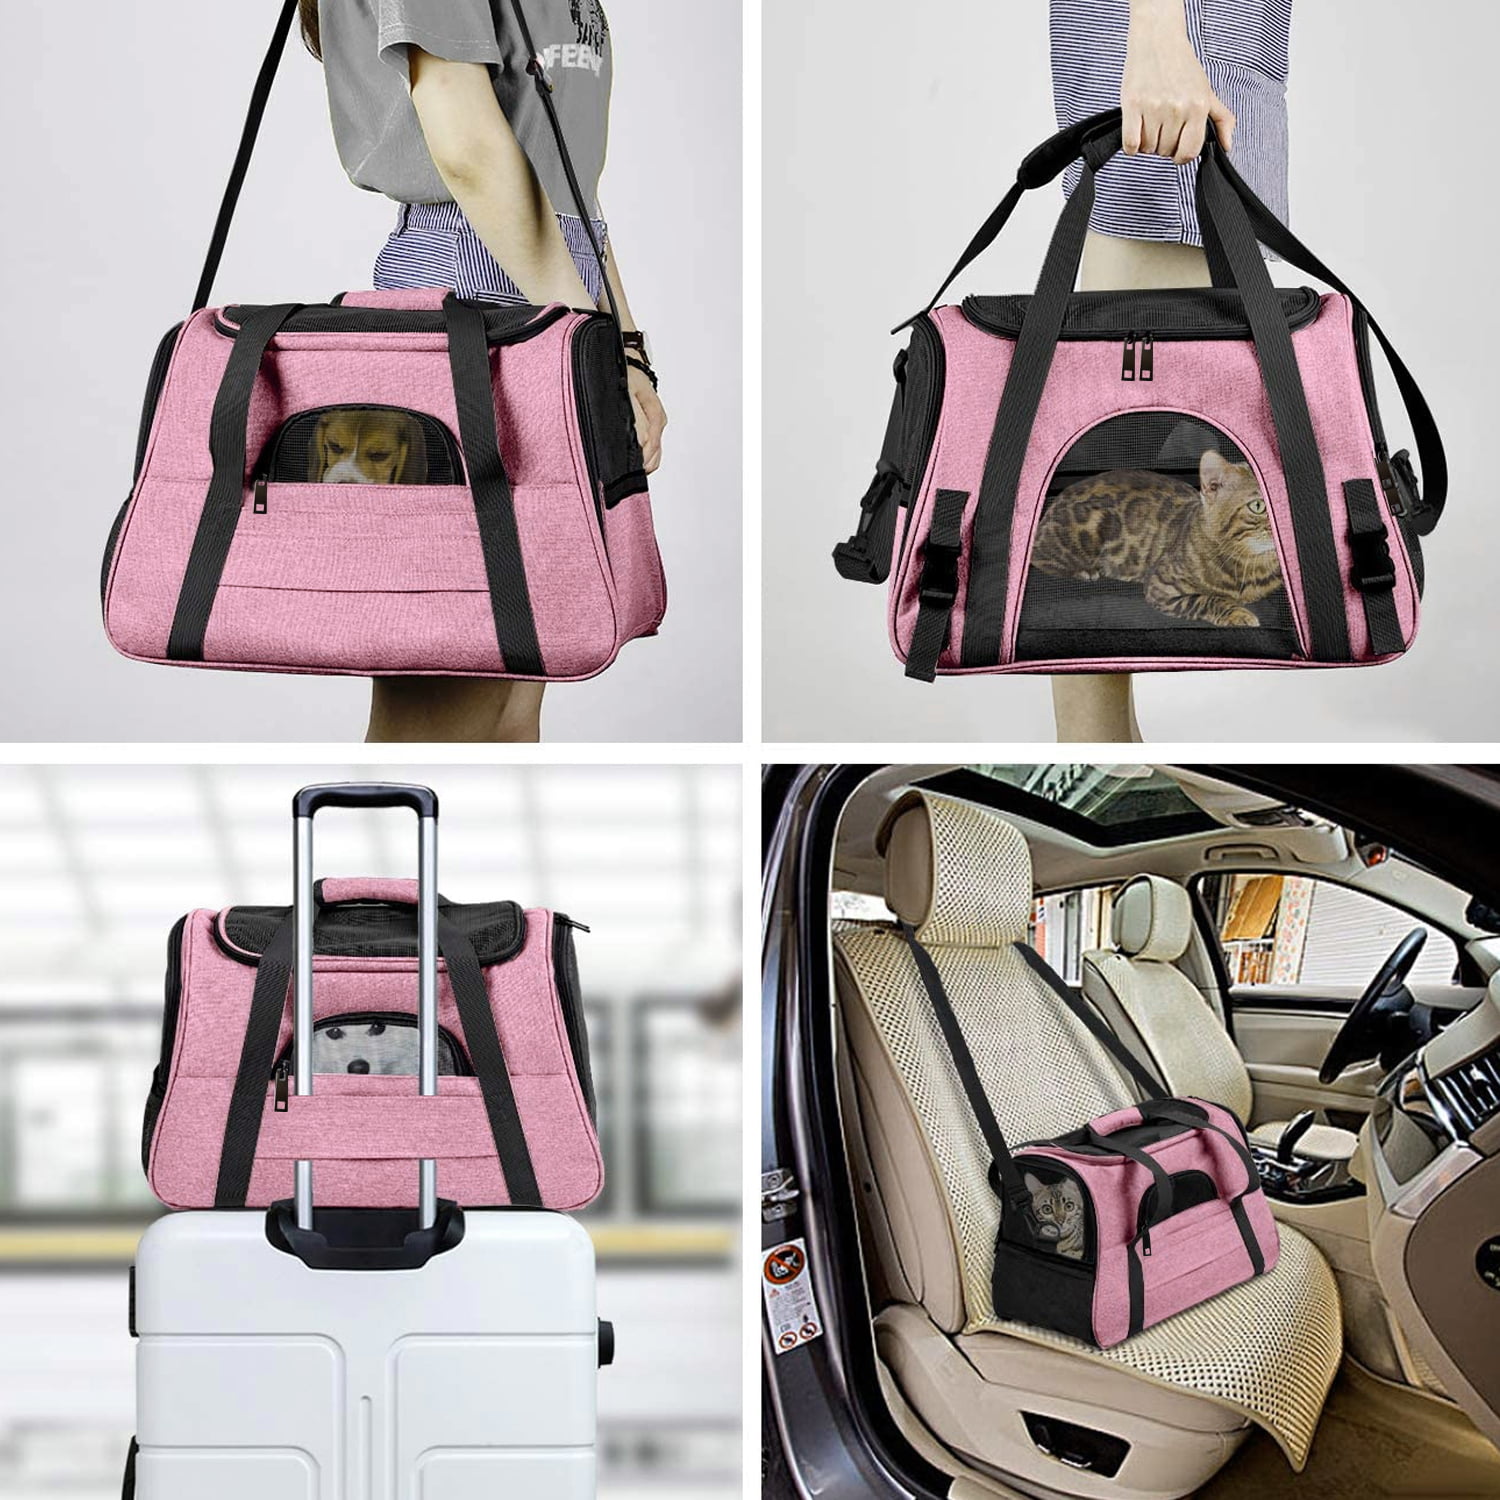 TIYOLAT Pet Carrier Bag, Airline Approved Duffle Bags, Pet Travel Portable  Bag Home for Little Dogs, Cats and Puppies, Small Animals (Small, Pink)